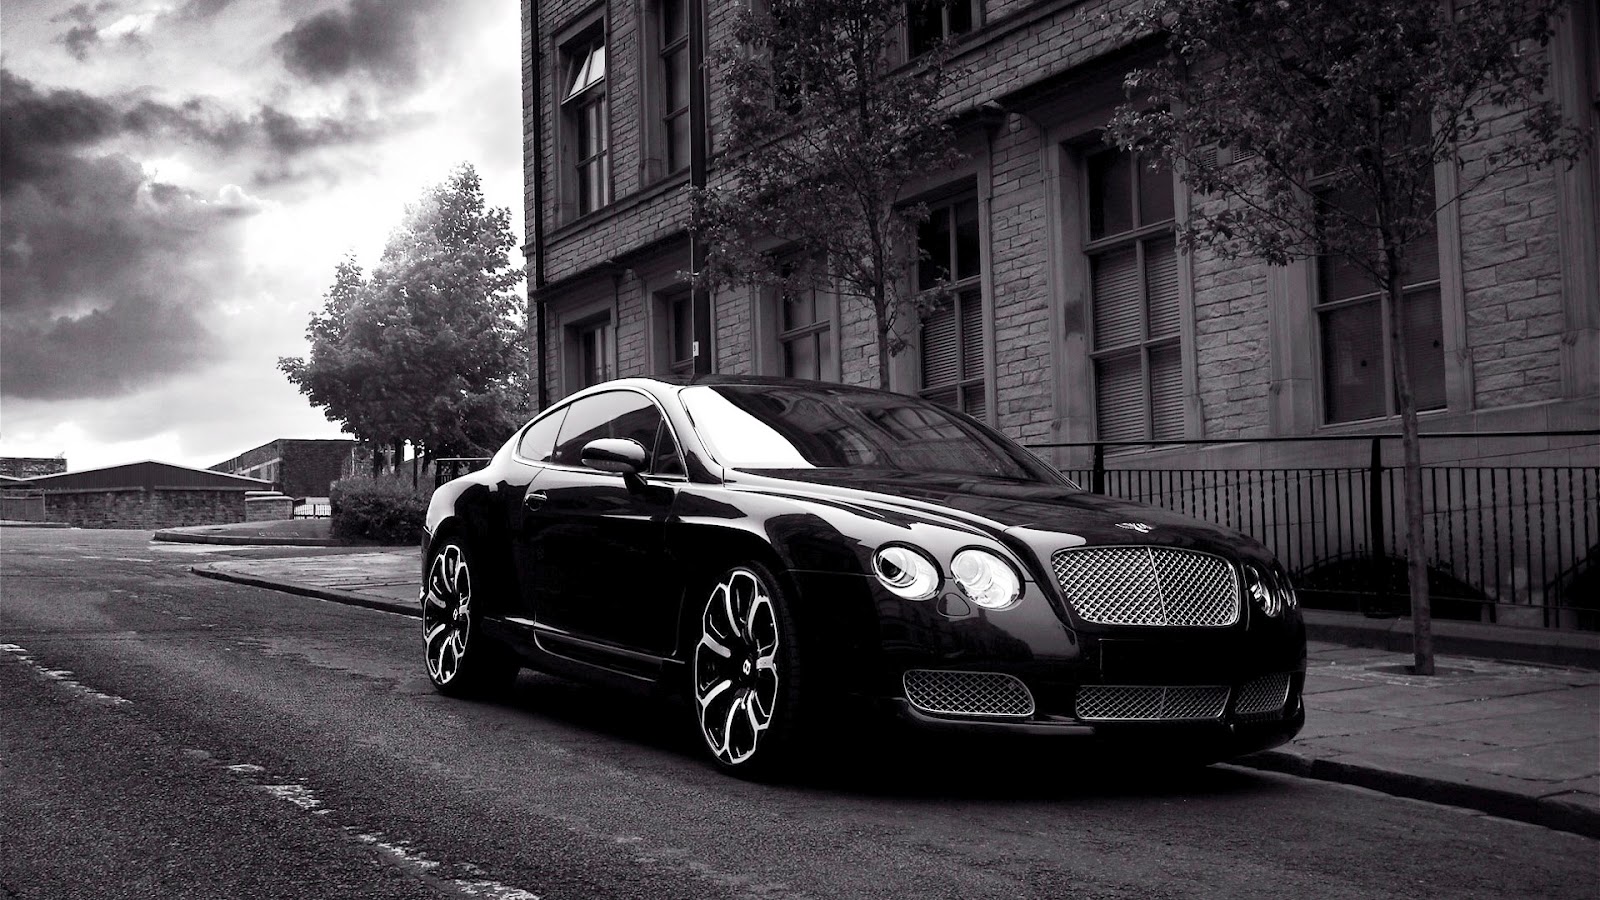 full hd car wallpapers 1920x1080,land vehicle,bentley continental gt,vehicle,luxury vehicle,car